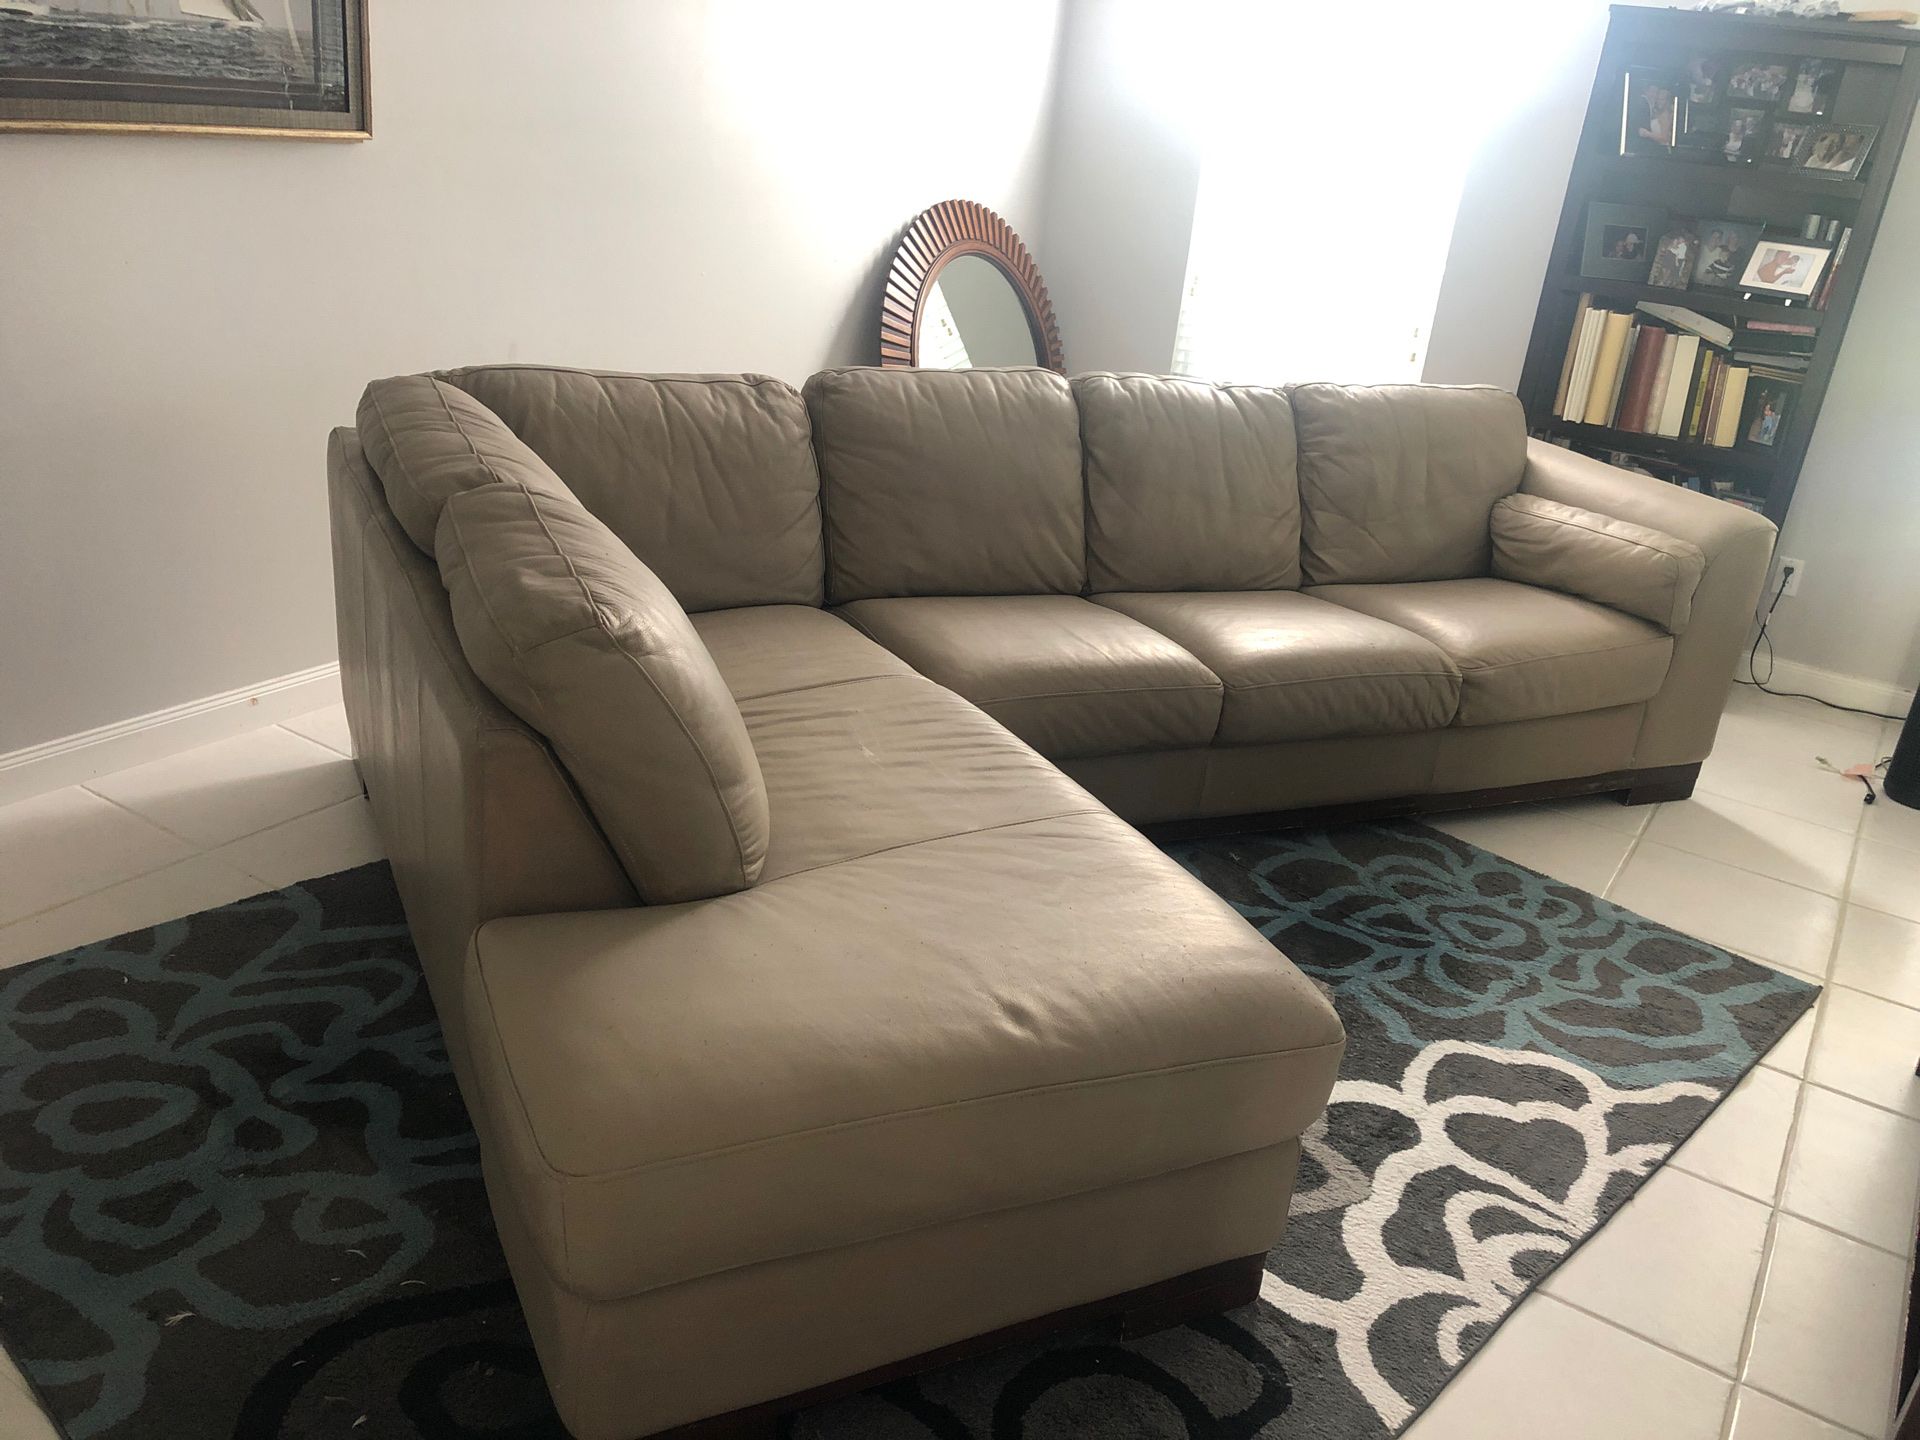 Tan leather sectional couch sofa